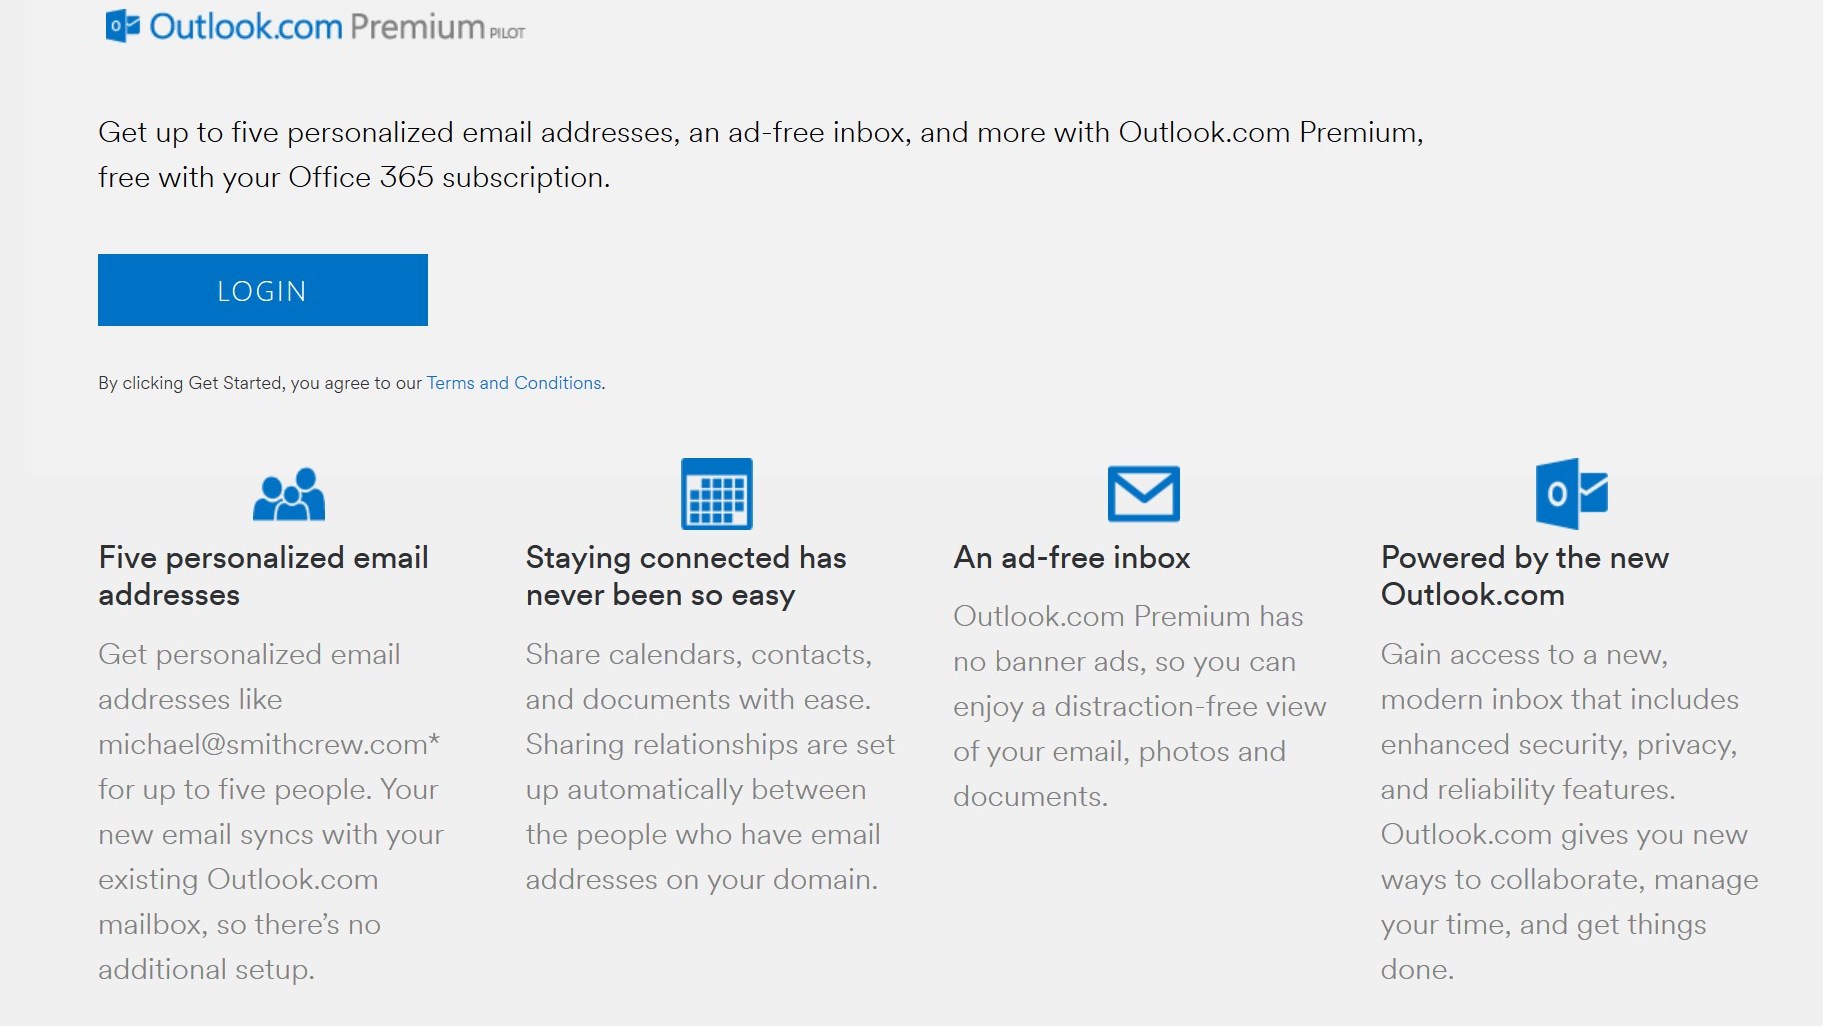 Microsoft's  Premium Is Free With Office 365 - Petri IT  Knowledgebase